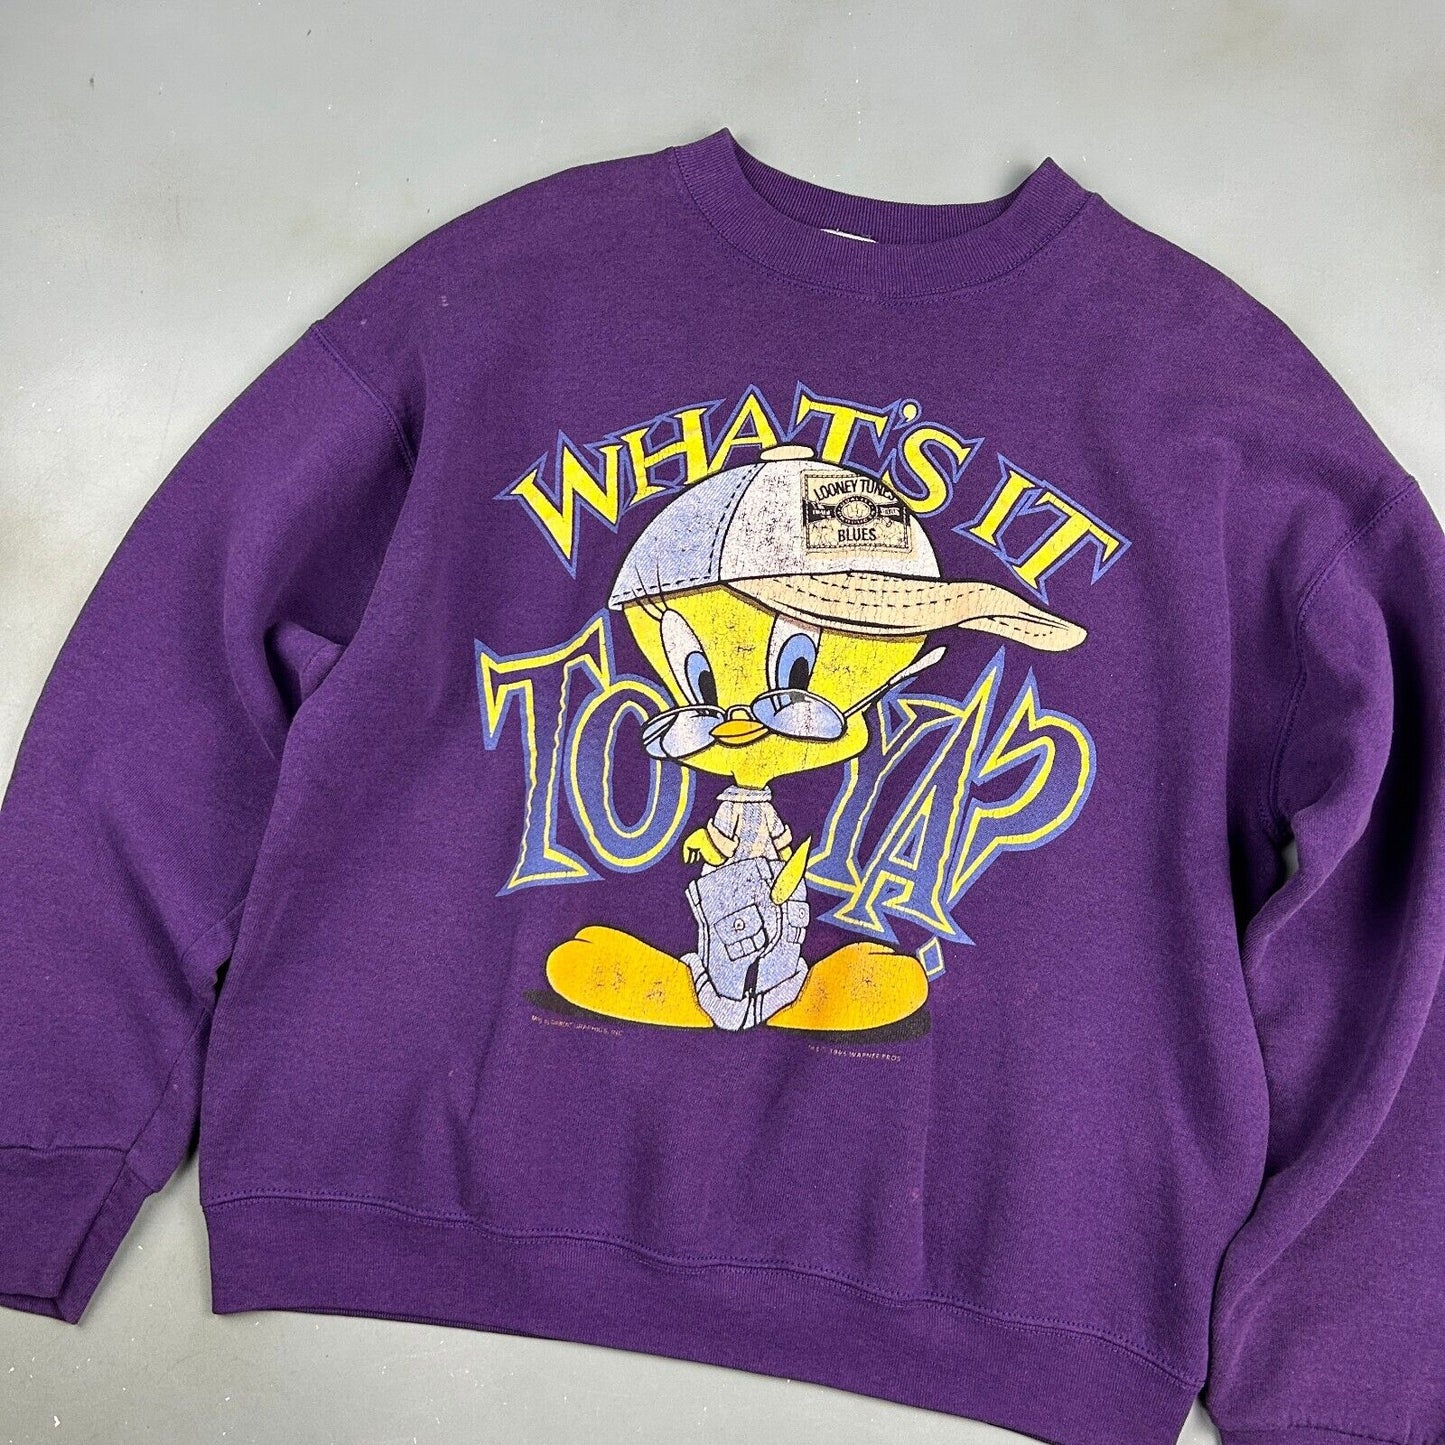 VINTAGE 1995 Tweety Whats It To Ya? Looney Tunes Sweater sz Large Adult